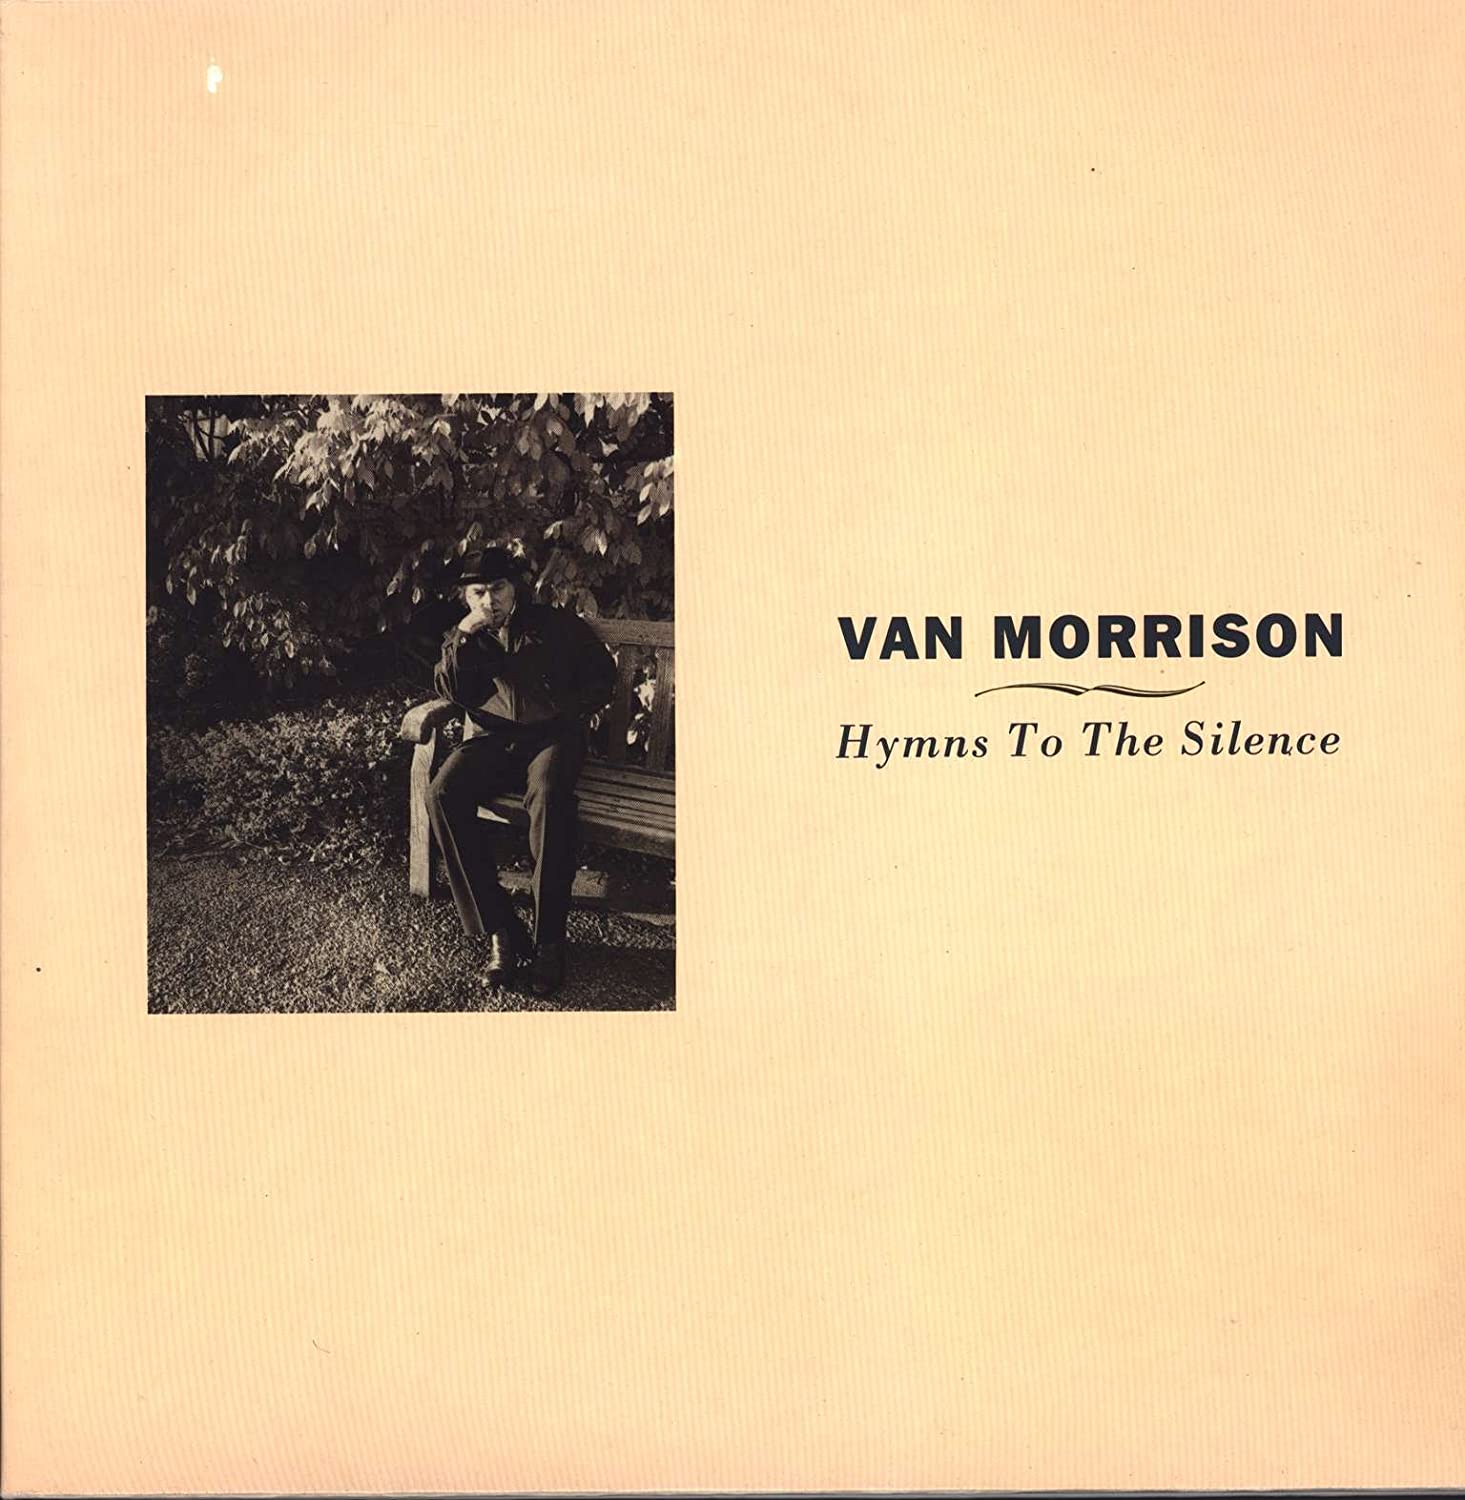 Van Morrison hymns to the silence